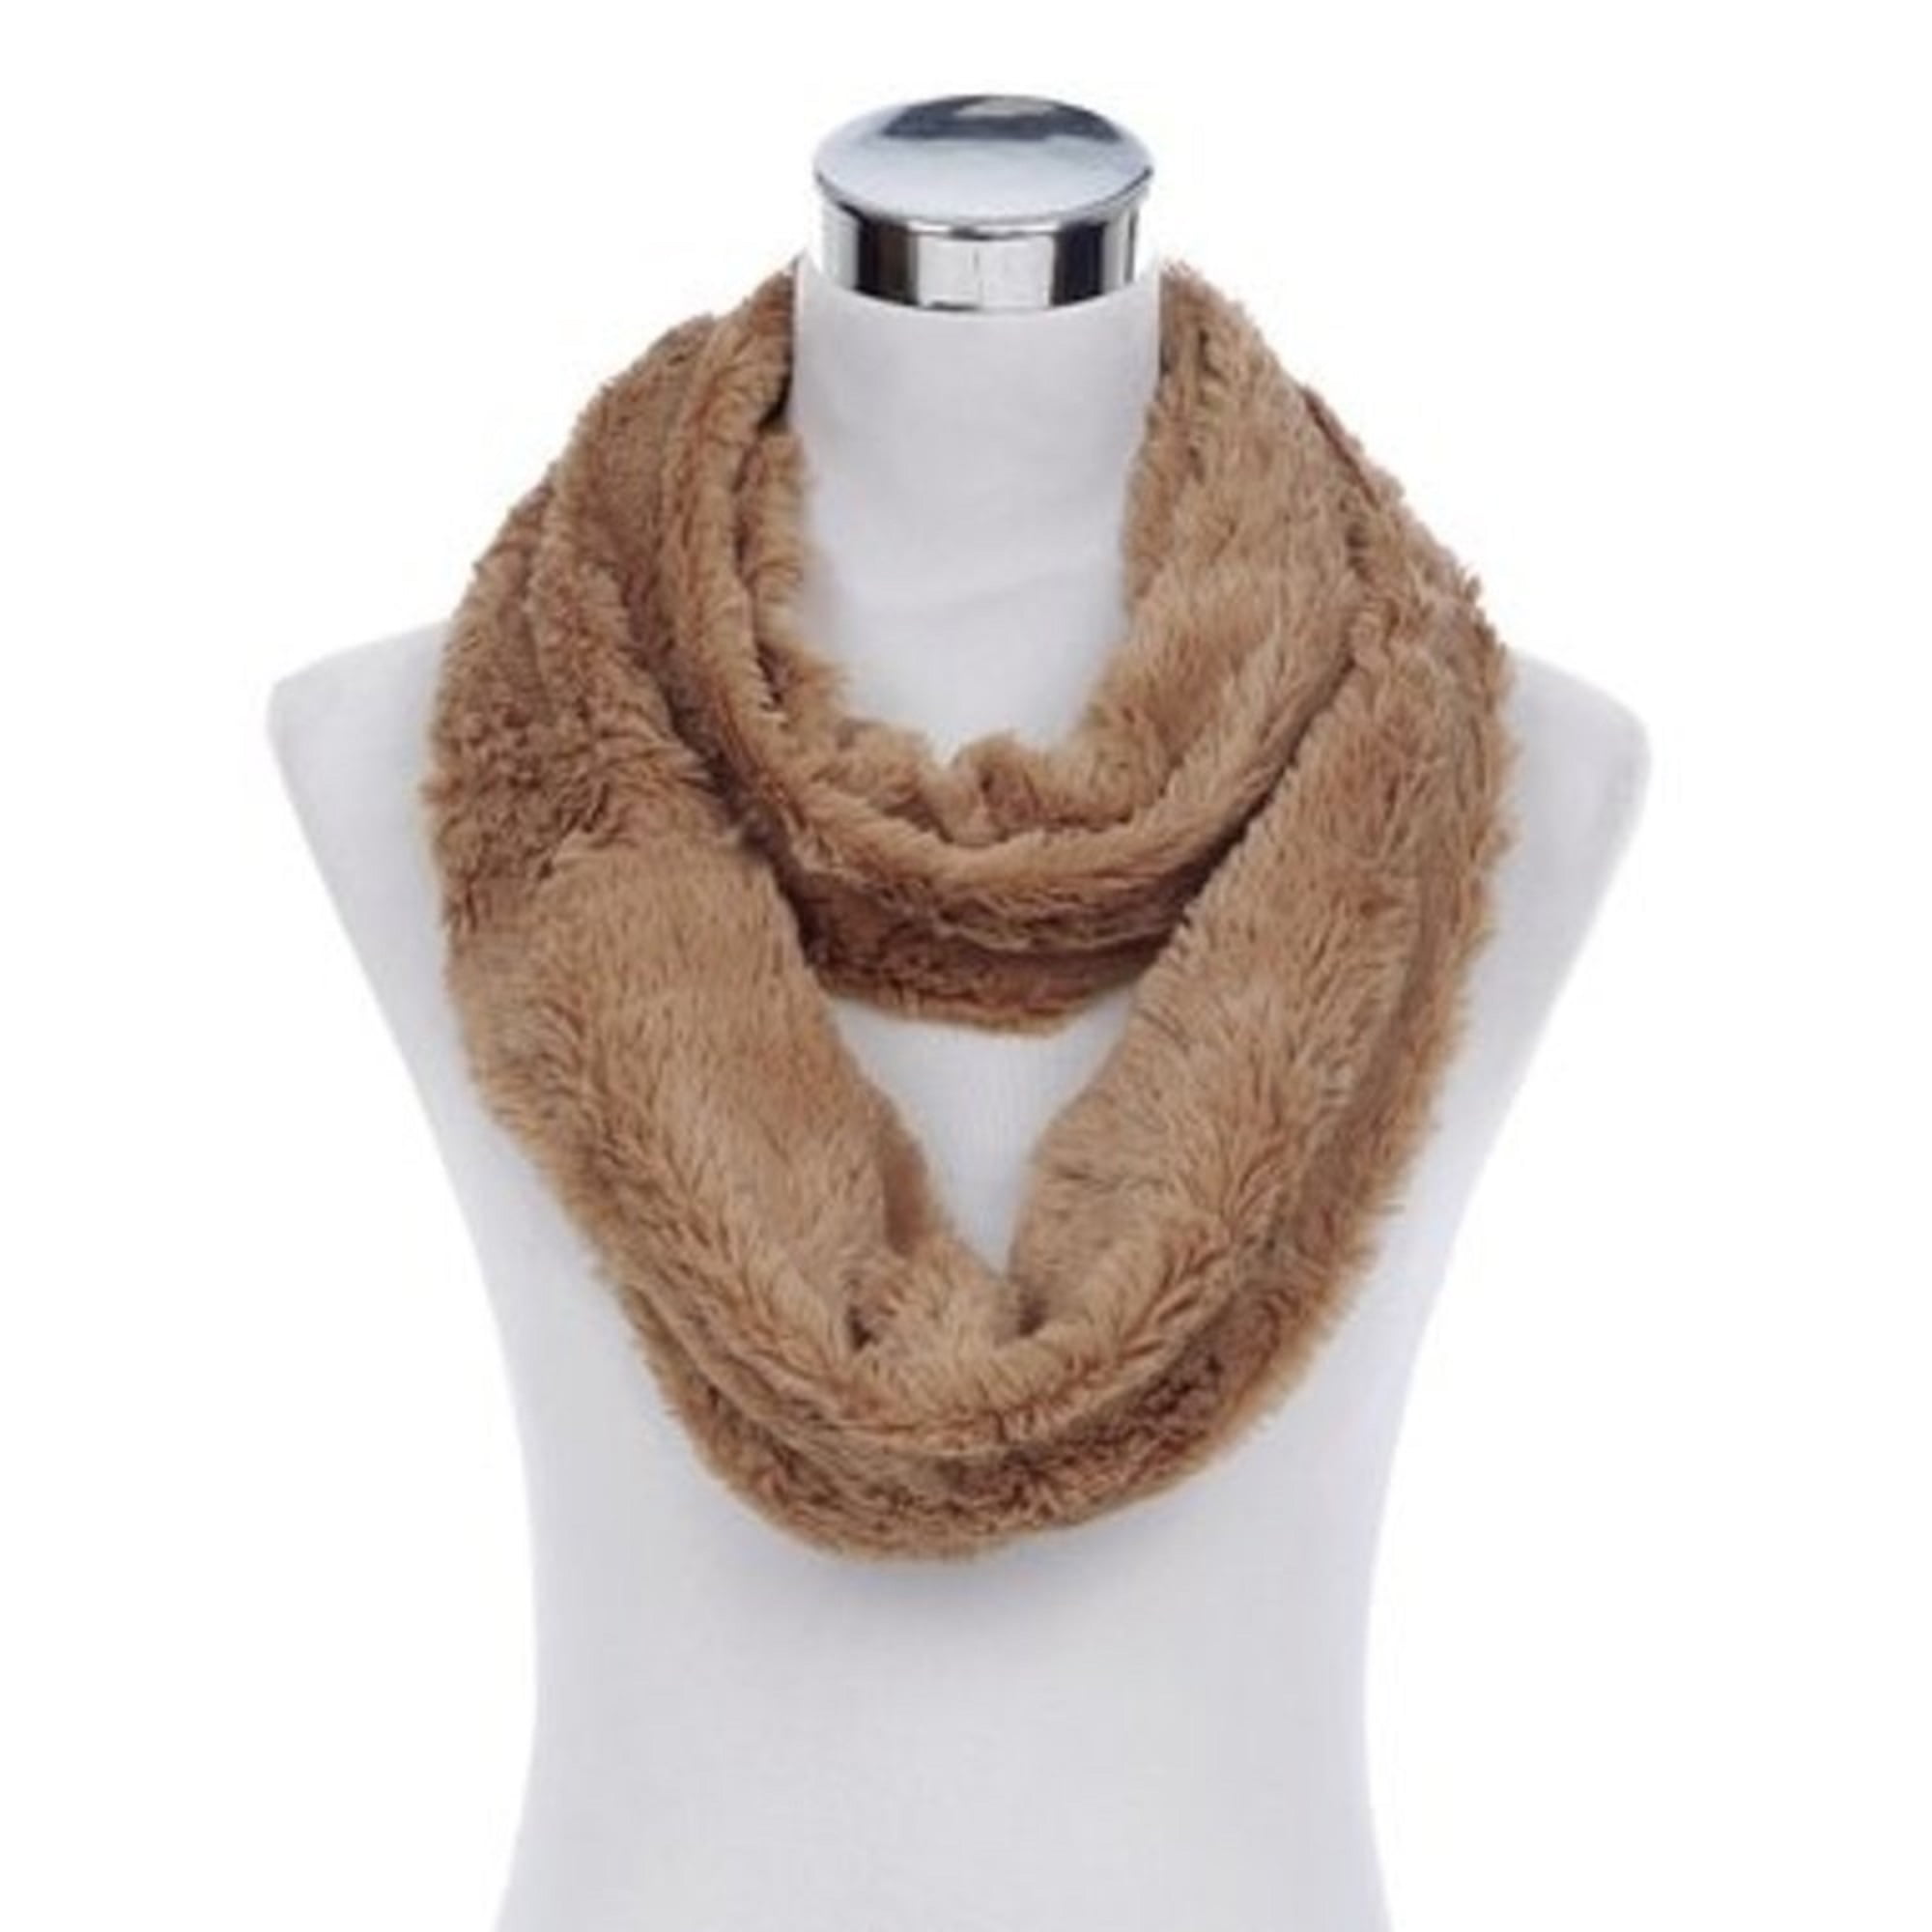 KM CHOICE ONE Scarf: Infinity Scarf, Faux Fur Shawl, Giving Shawl, Scarfs  for Women Winter Warm, Shawl Wraps for Women, Gifts for Men, Christmas  Gift, Soft & Fluffy Scarf in Gift Box (